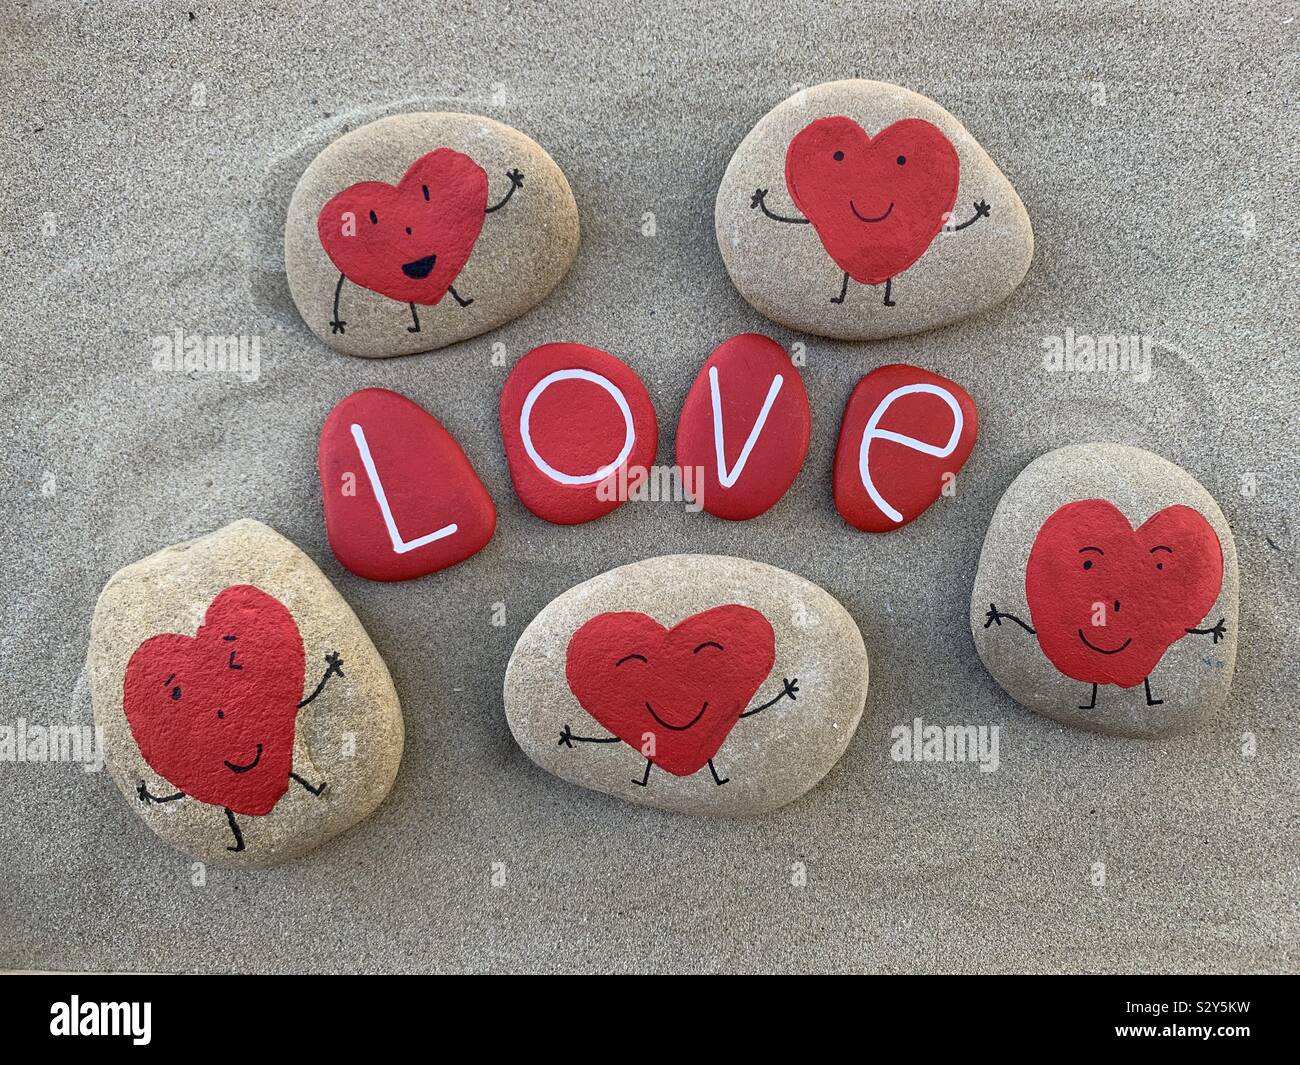 Love message with creative painted stones over brown sand Stock Photo